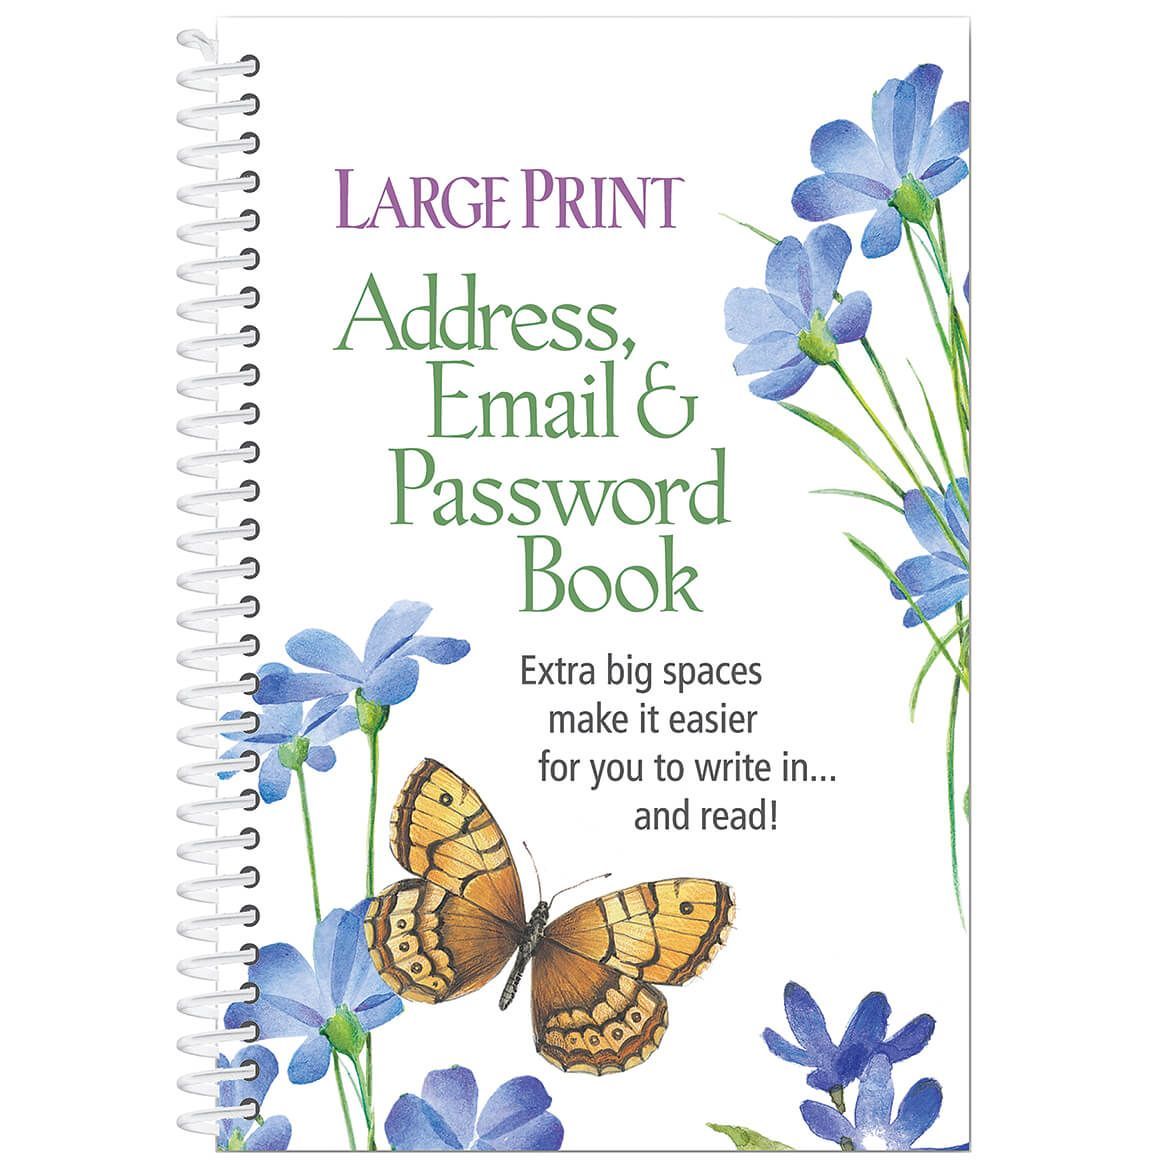 Large Print Address, Email & Password Book + '-' + 352395